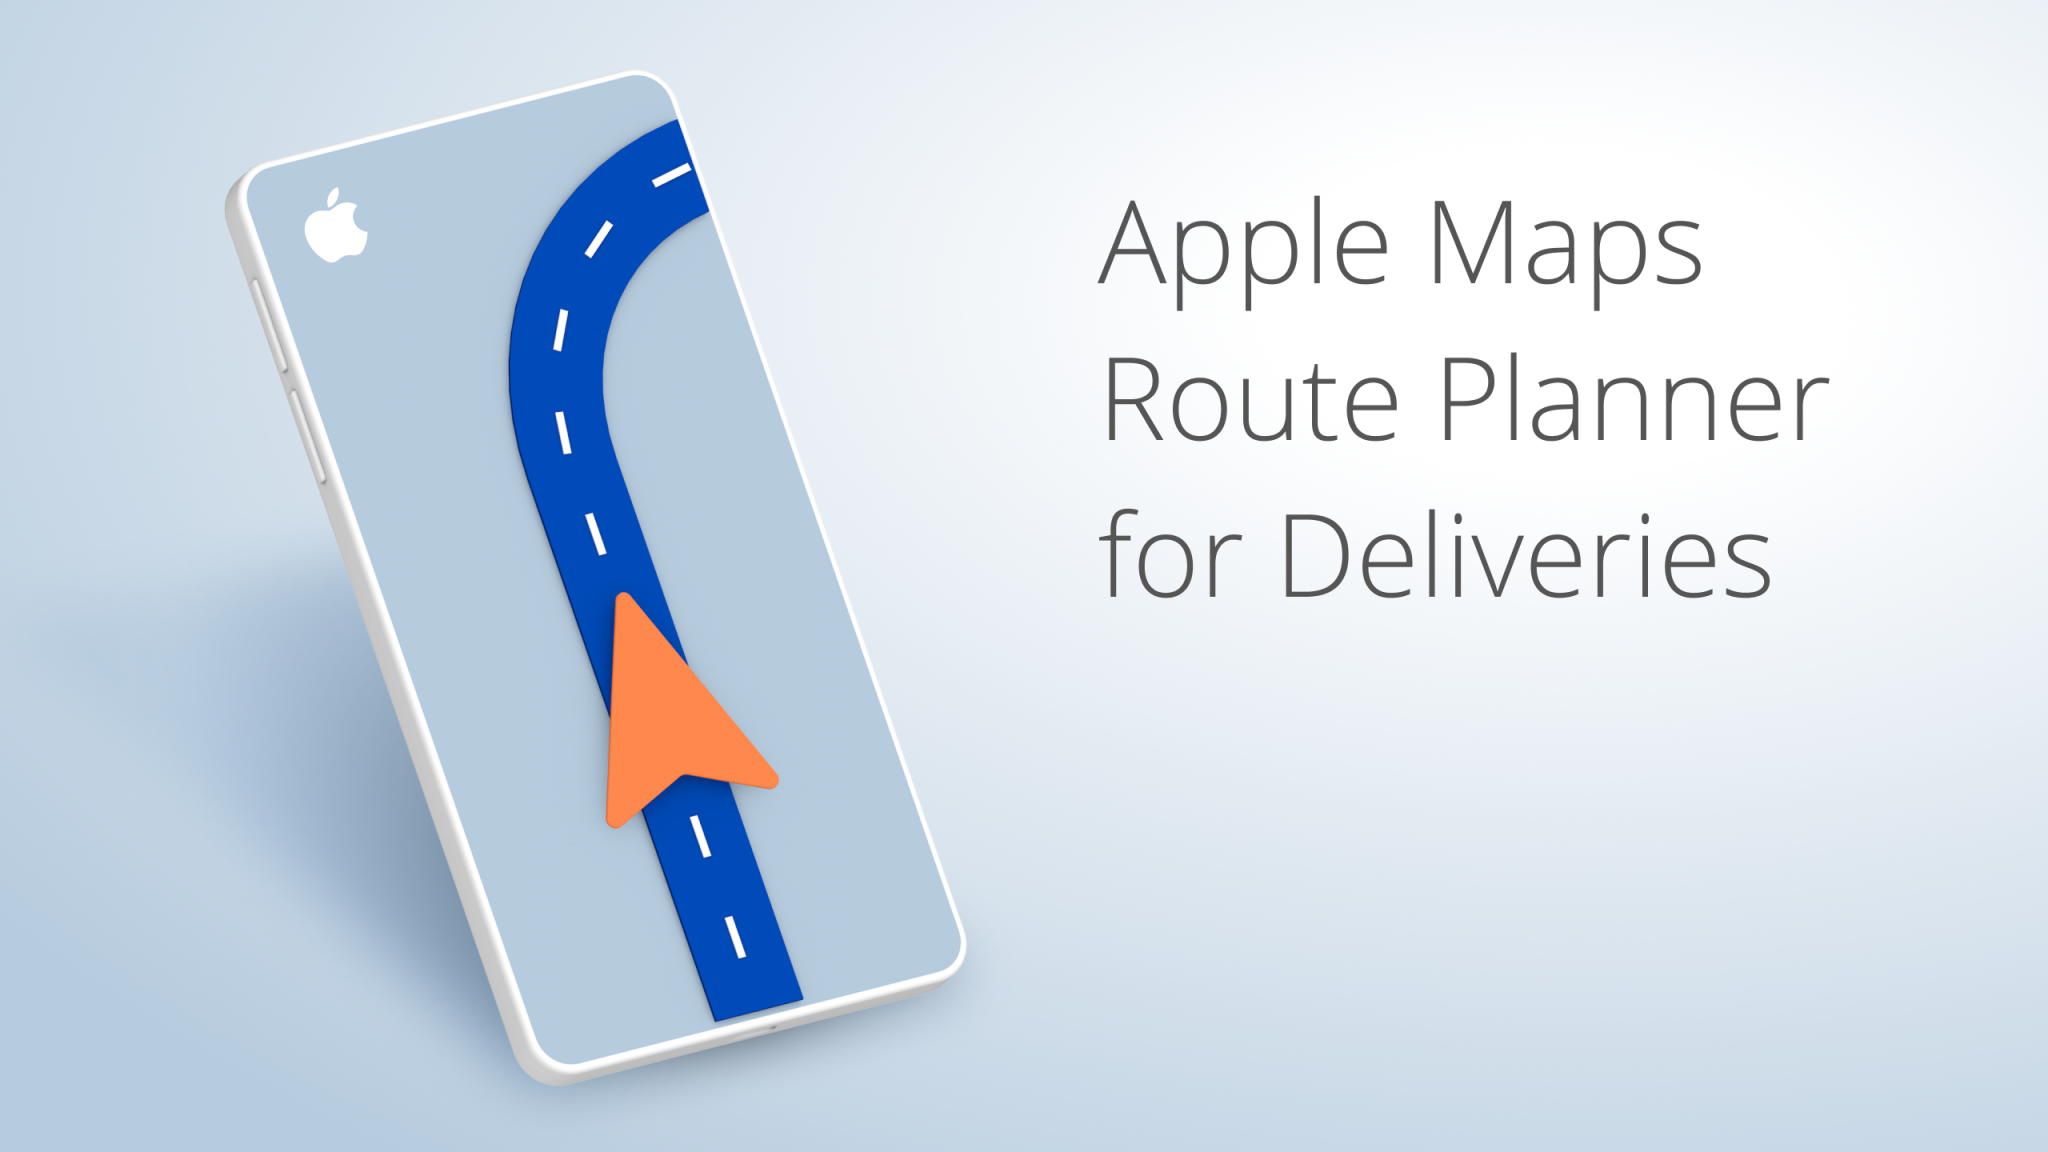 Afd797dc Apple Maps Route Planner For Deliveries@2x 2048x1152 